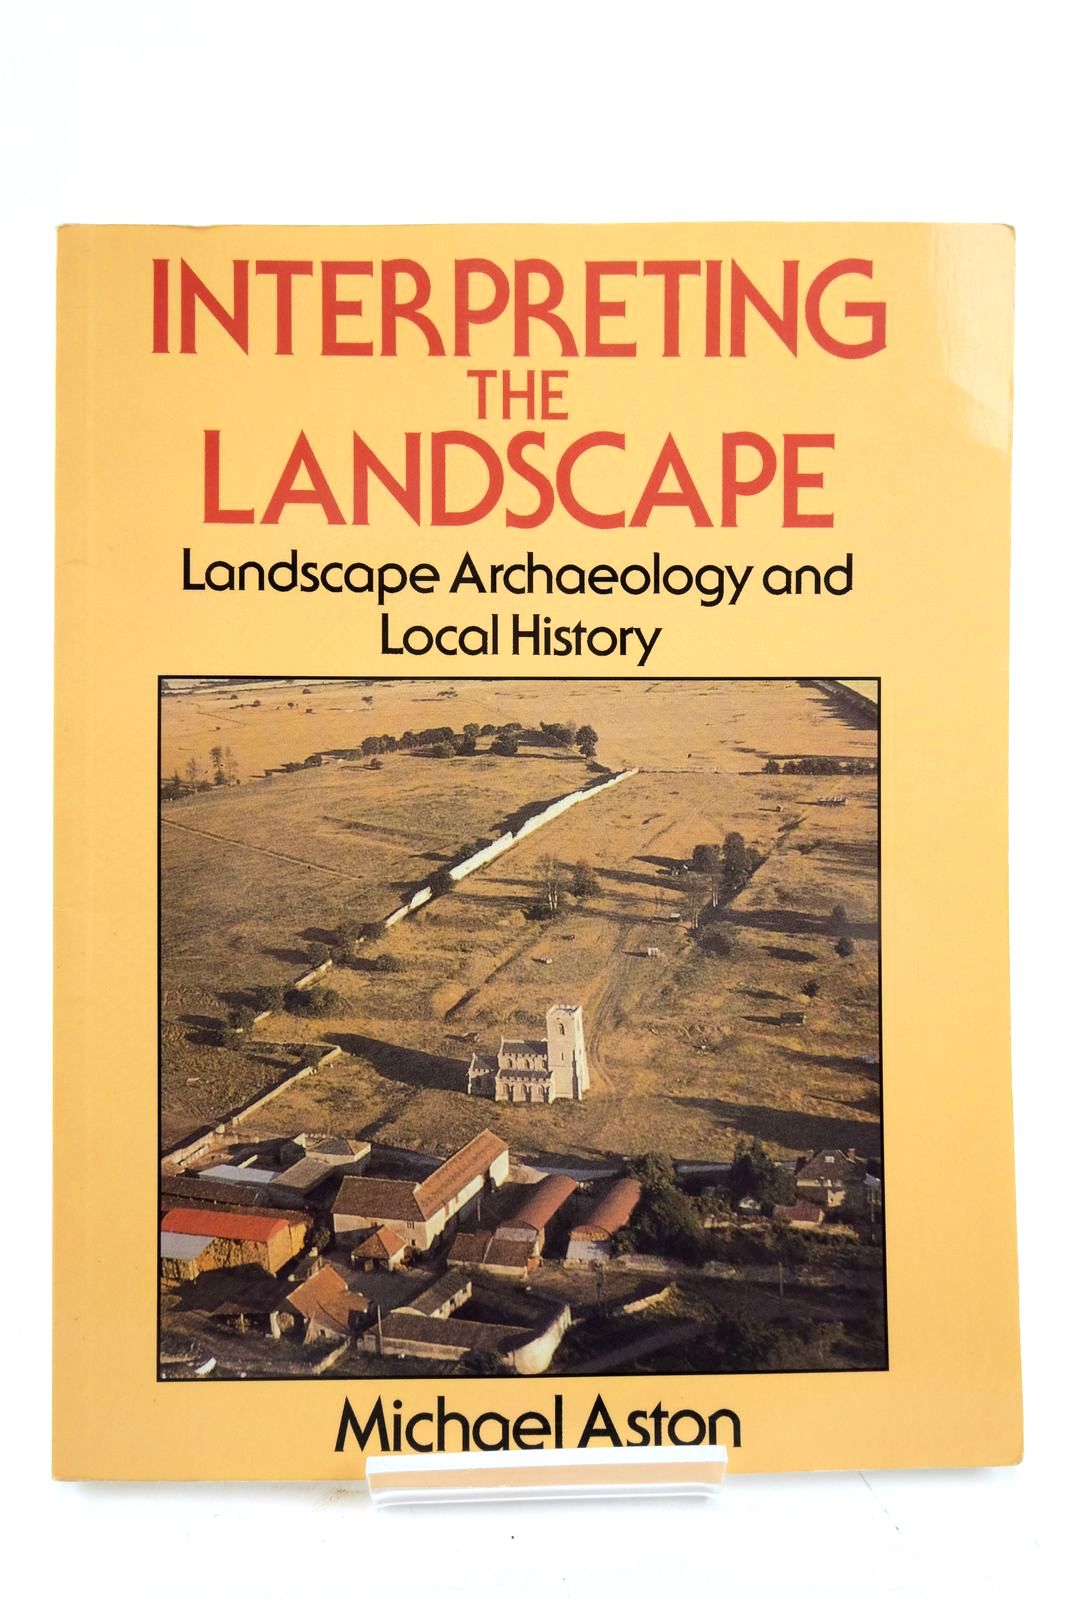 Photo of INTERPRETING THE LANDSCAPE: LANDSCAPE ARCHAEOLOGY AND LOCAL HISTORY written by Aston, Michael published by Routledge (STOCK CODE: 2136690)  for sale by Stella & Rose's Books